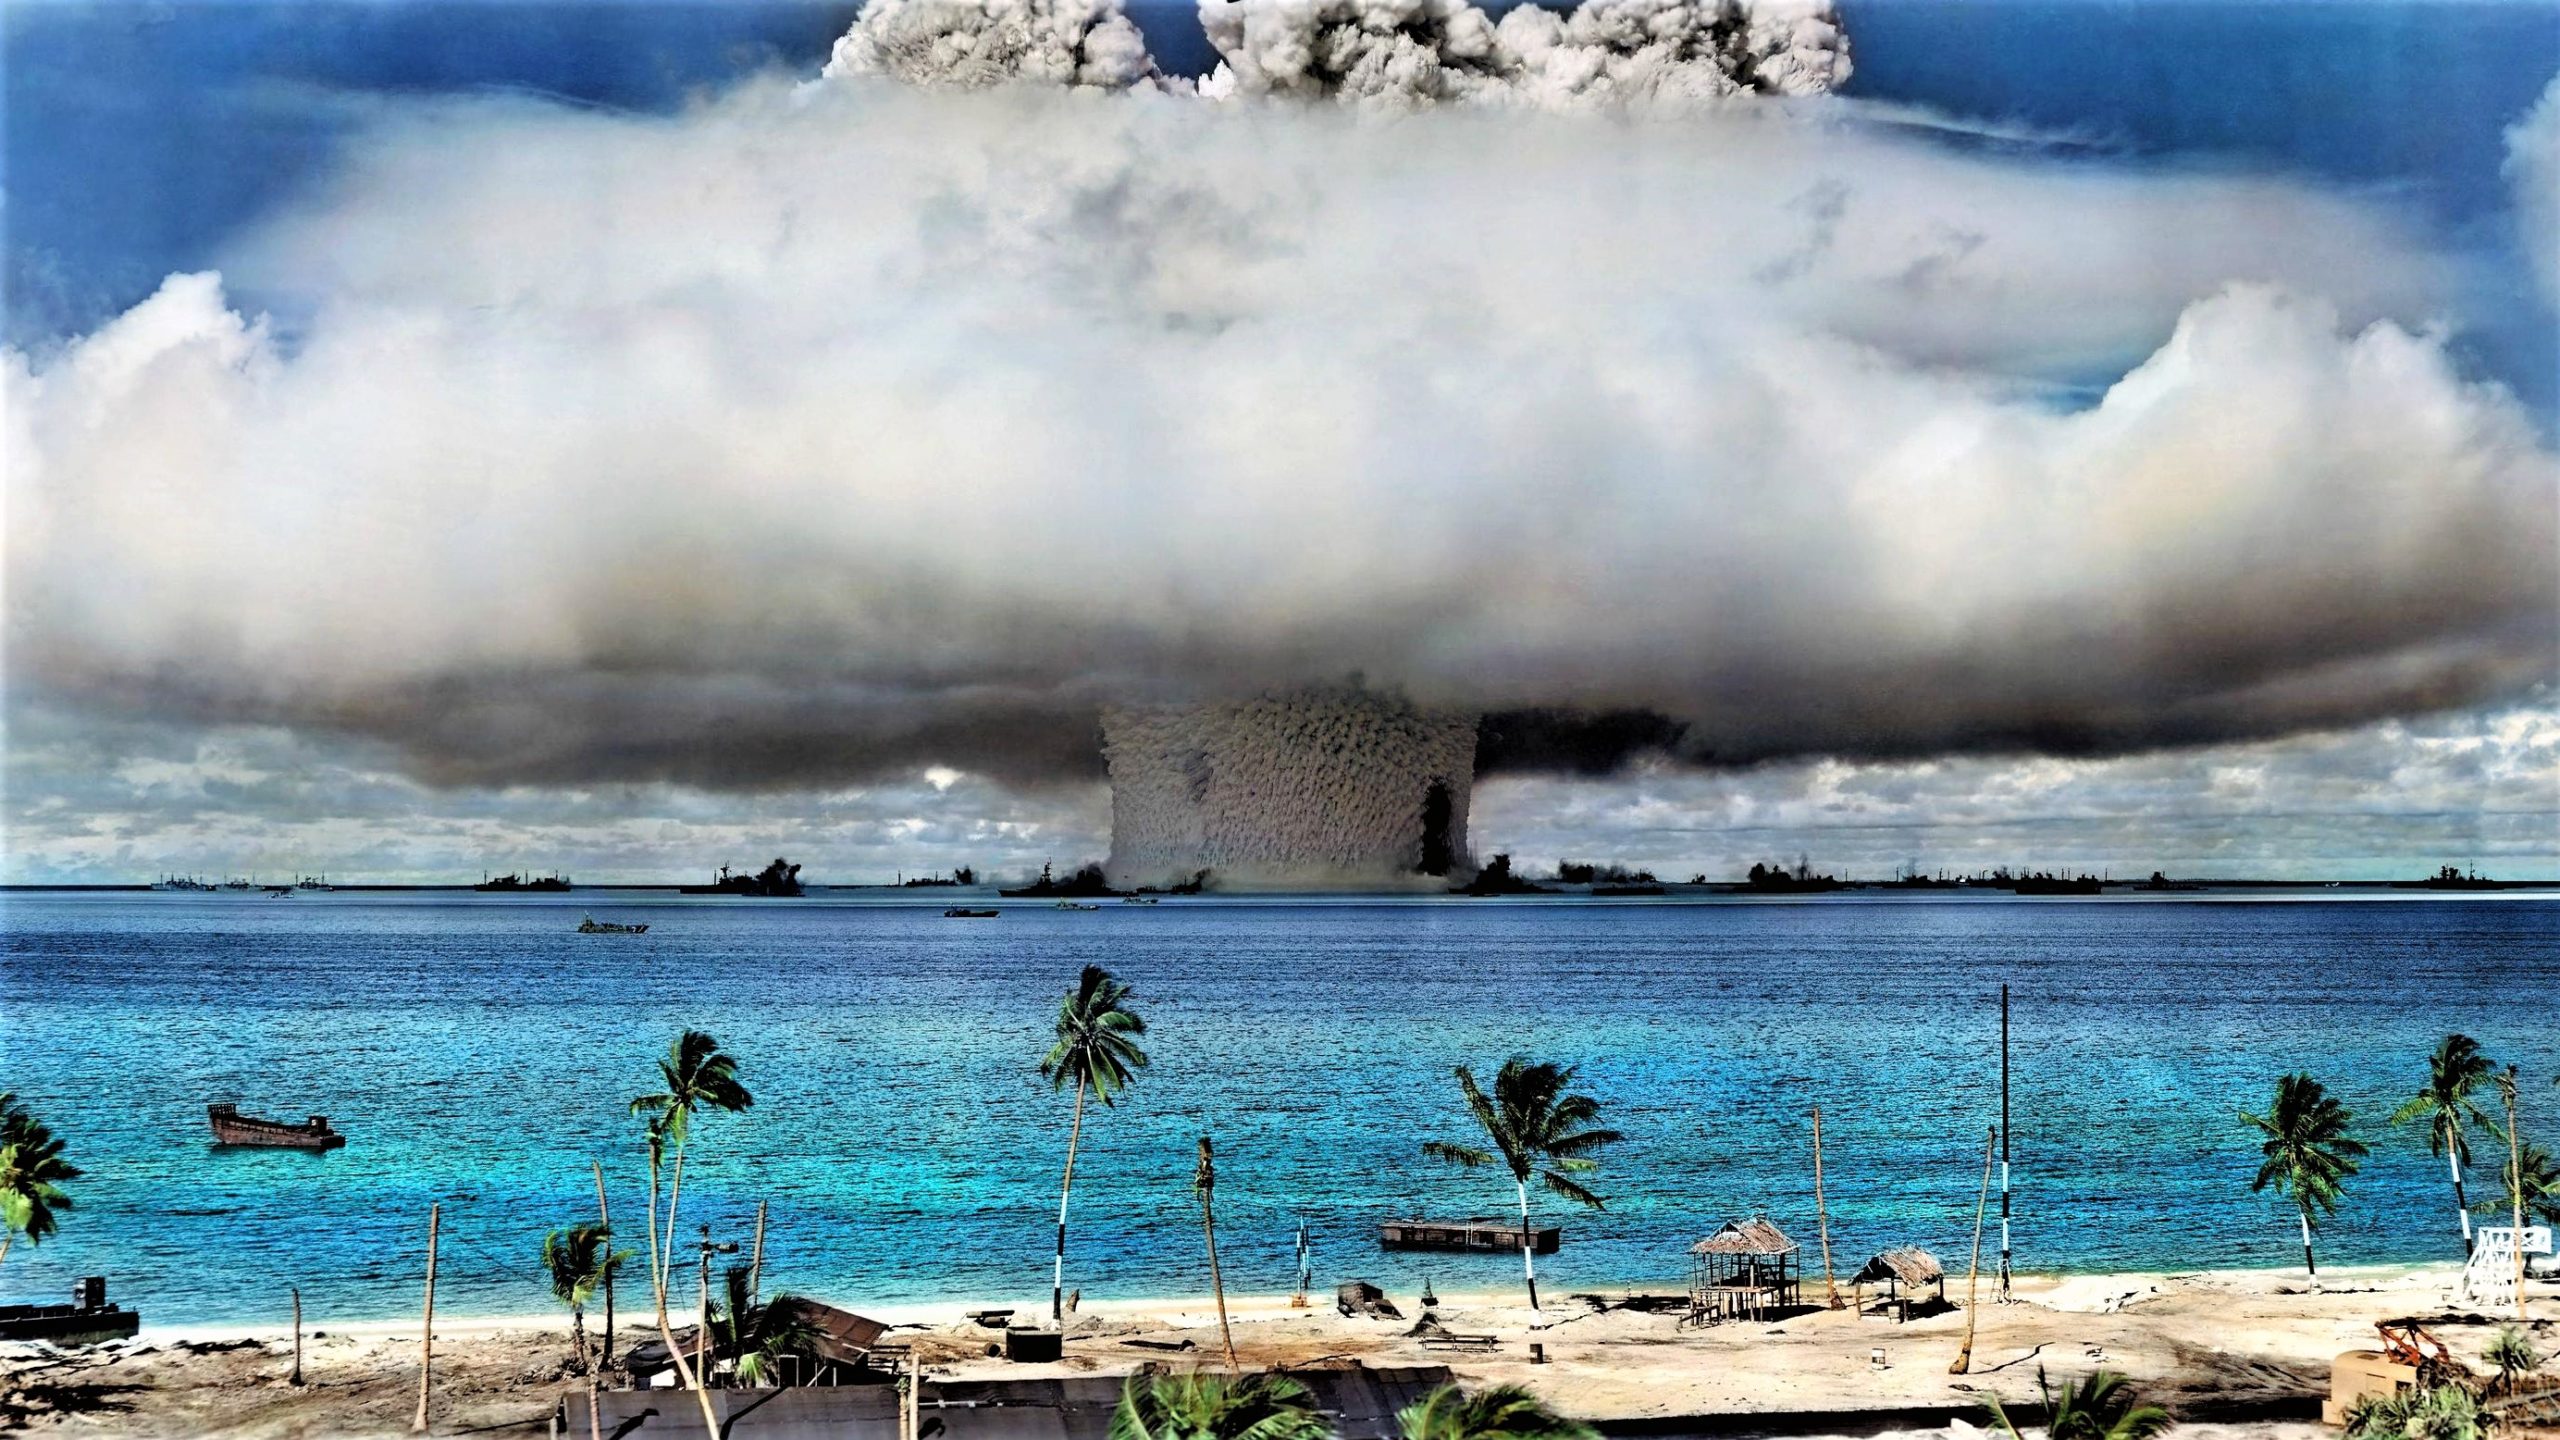 What’s The Difference Between A Hydrogen Bomb And A Typical Atomic Bomb?